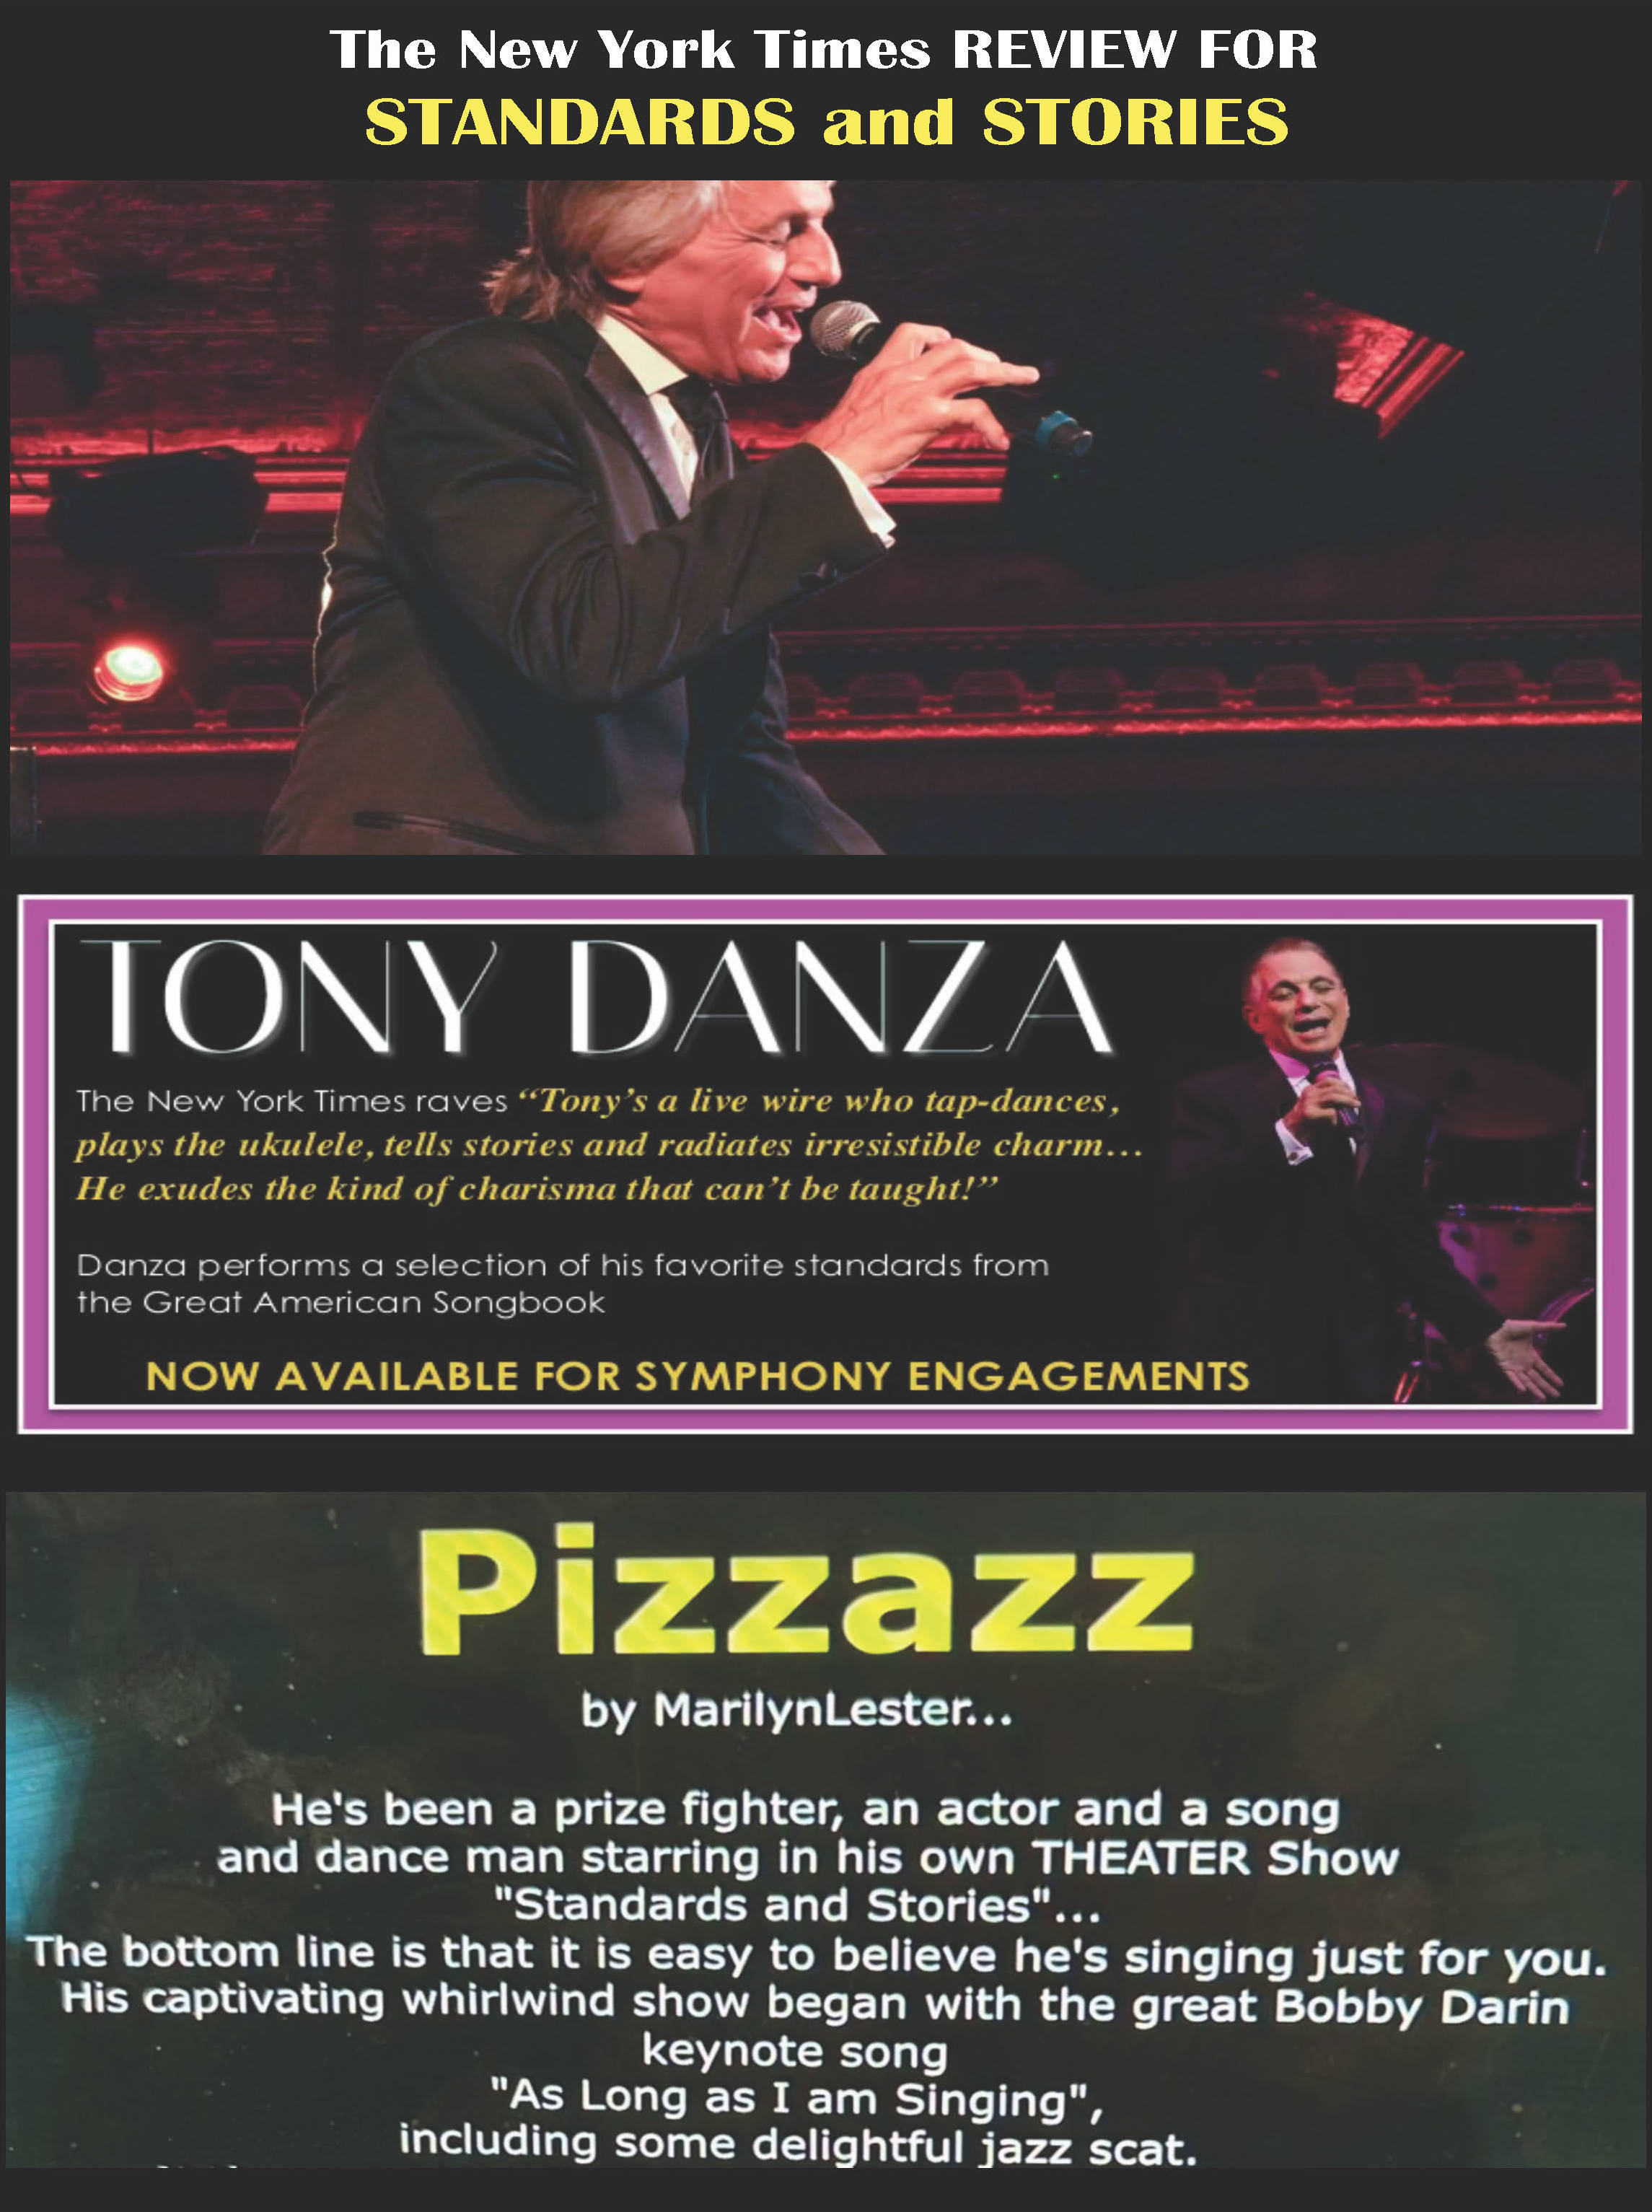 Tony Danza; The New York Times raves Tony's a live wire who tap-dances, plays the ukulele, tells stories and radiates irresistible charm... He exudes the kind of charisma that can't be taught!; Danza performs a selection of his favorite standards from the Great American Songbook